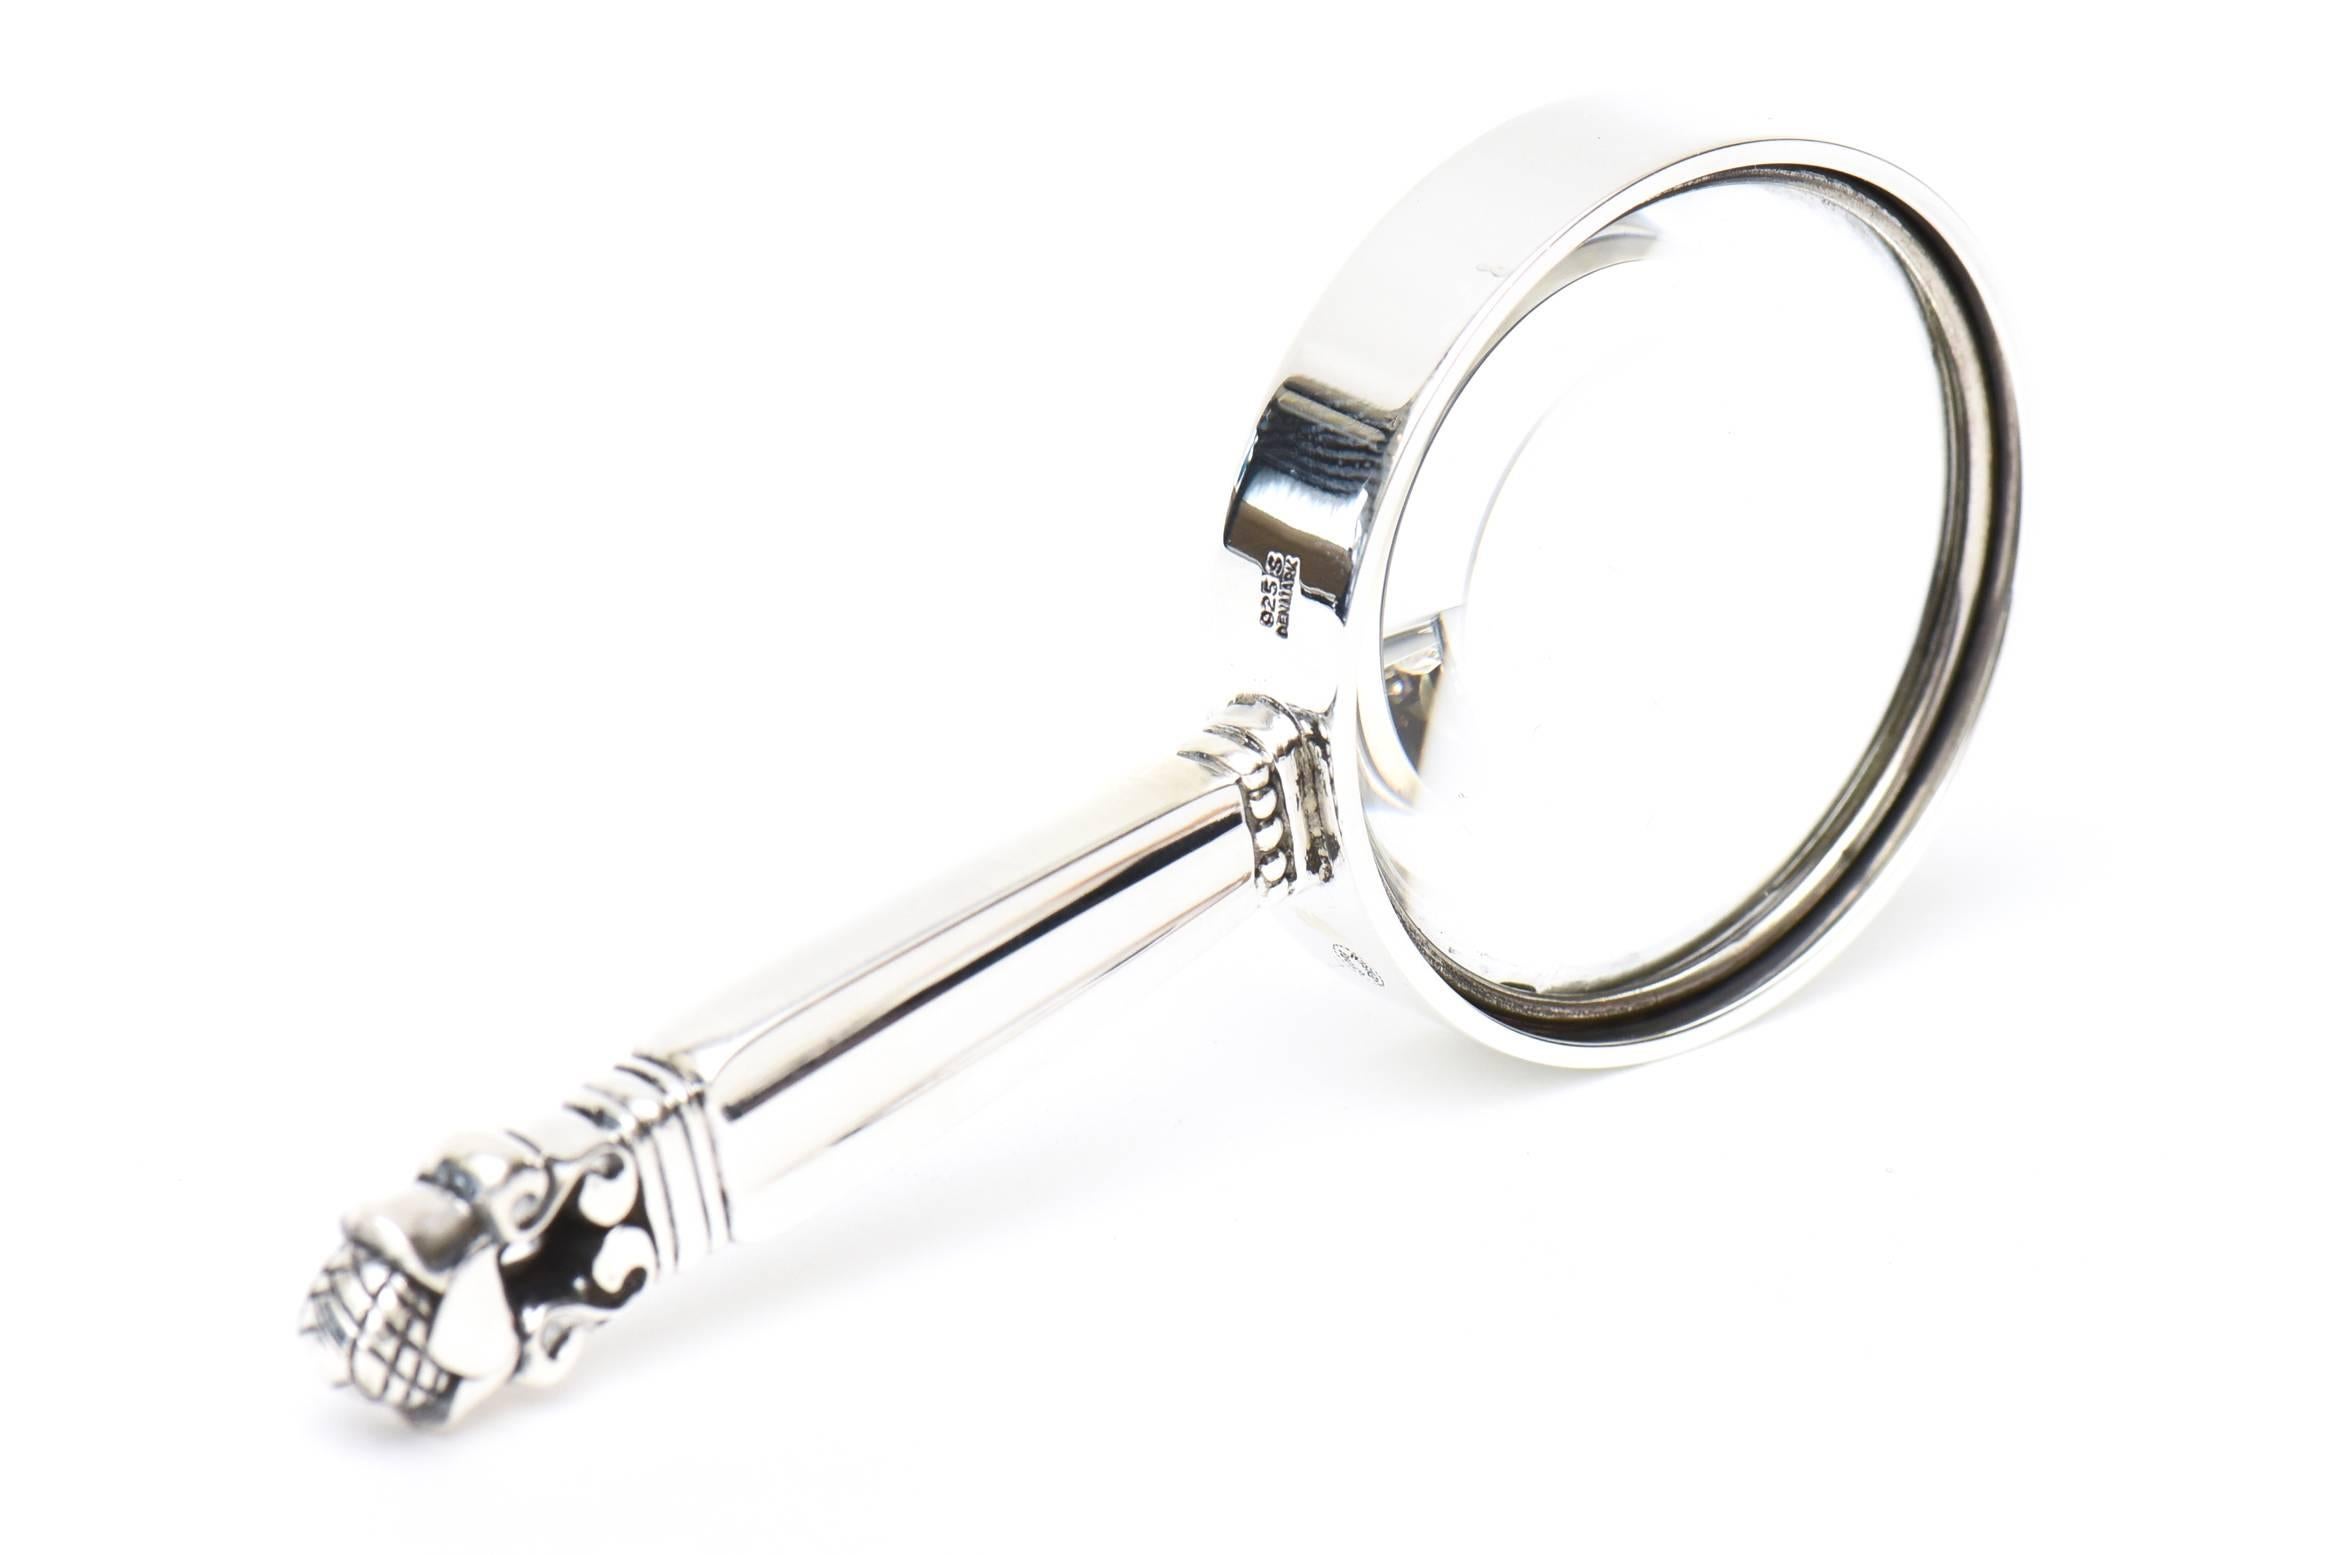 magnifying glasses for sale